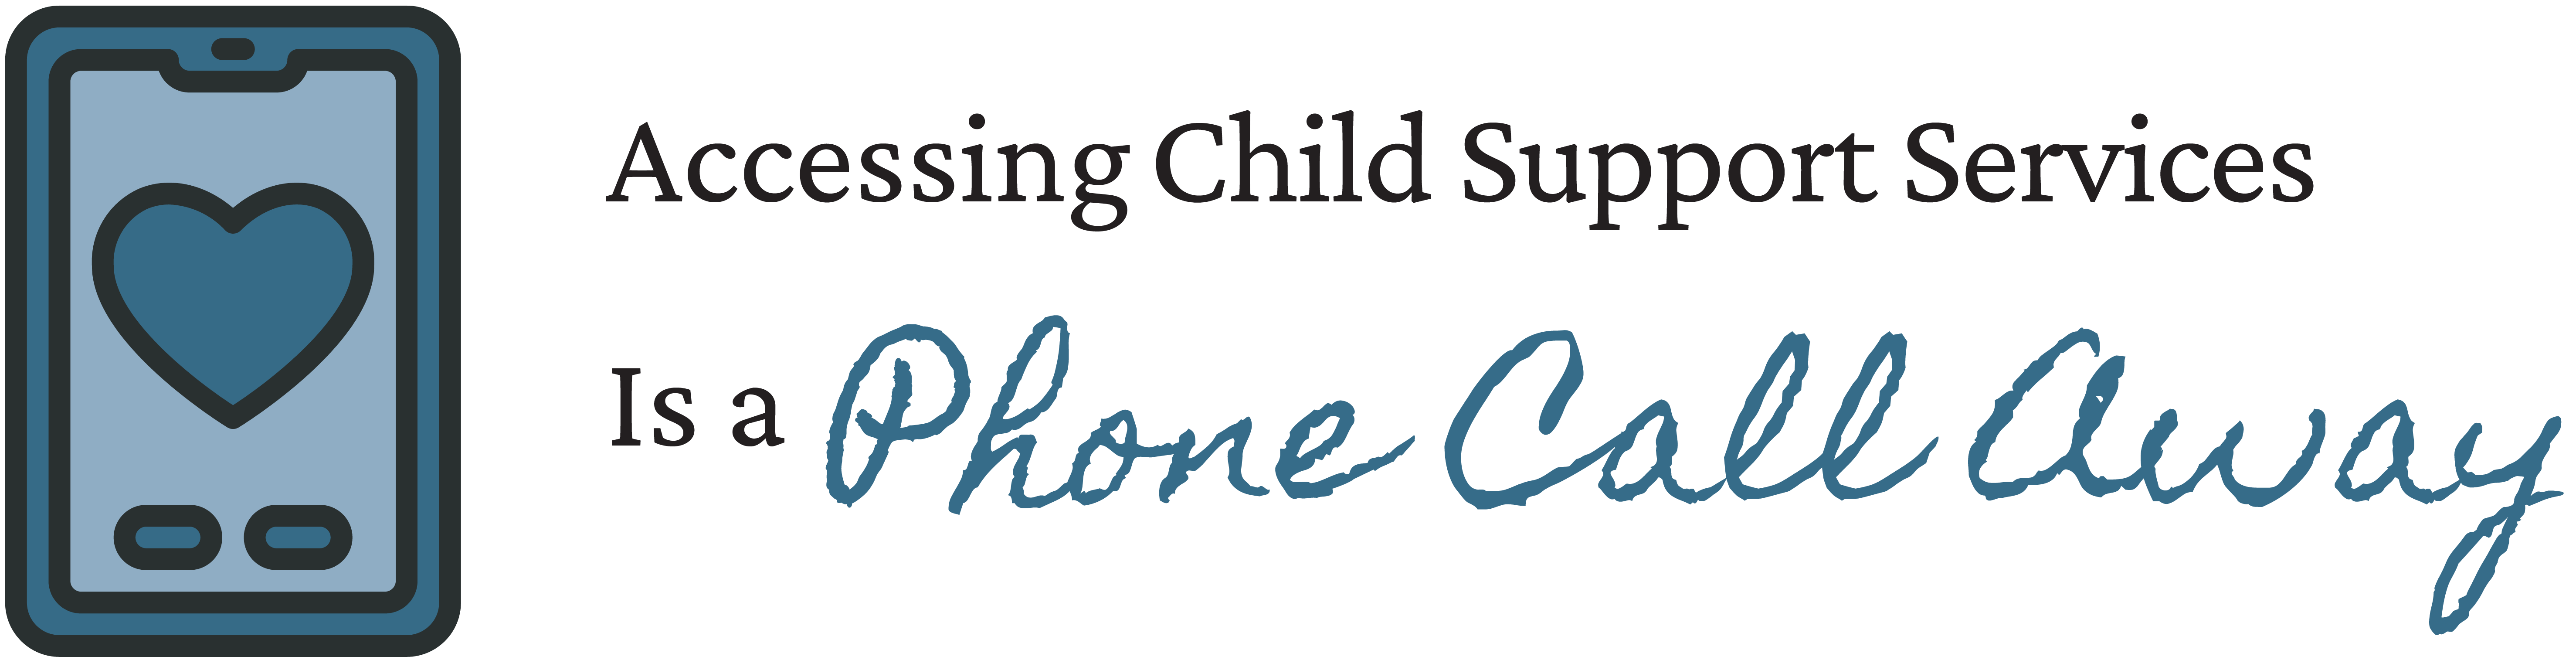 Accessing Child Support Services is a Phone Call Away